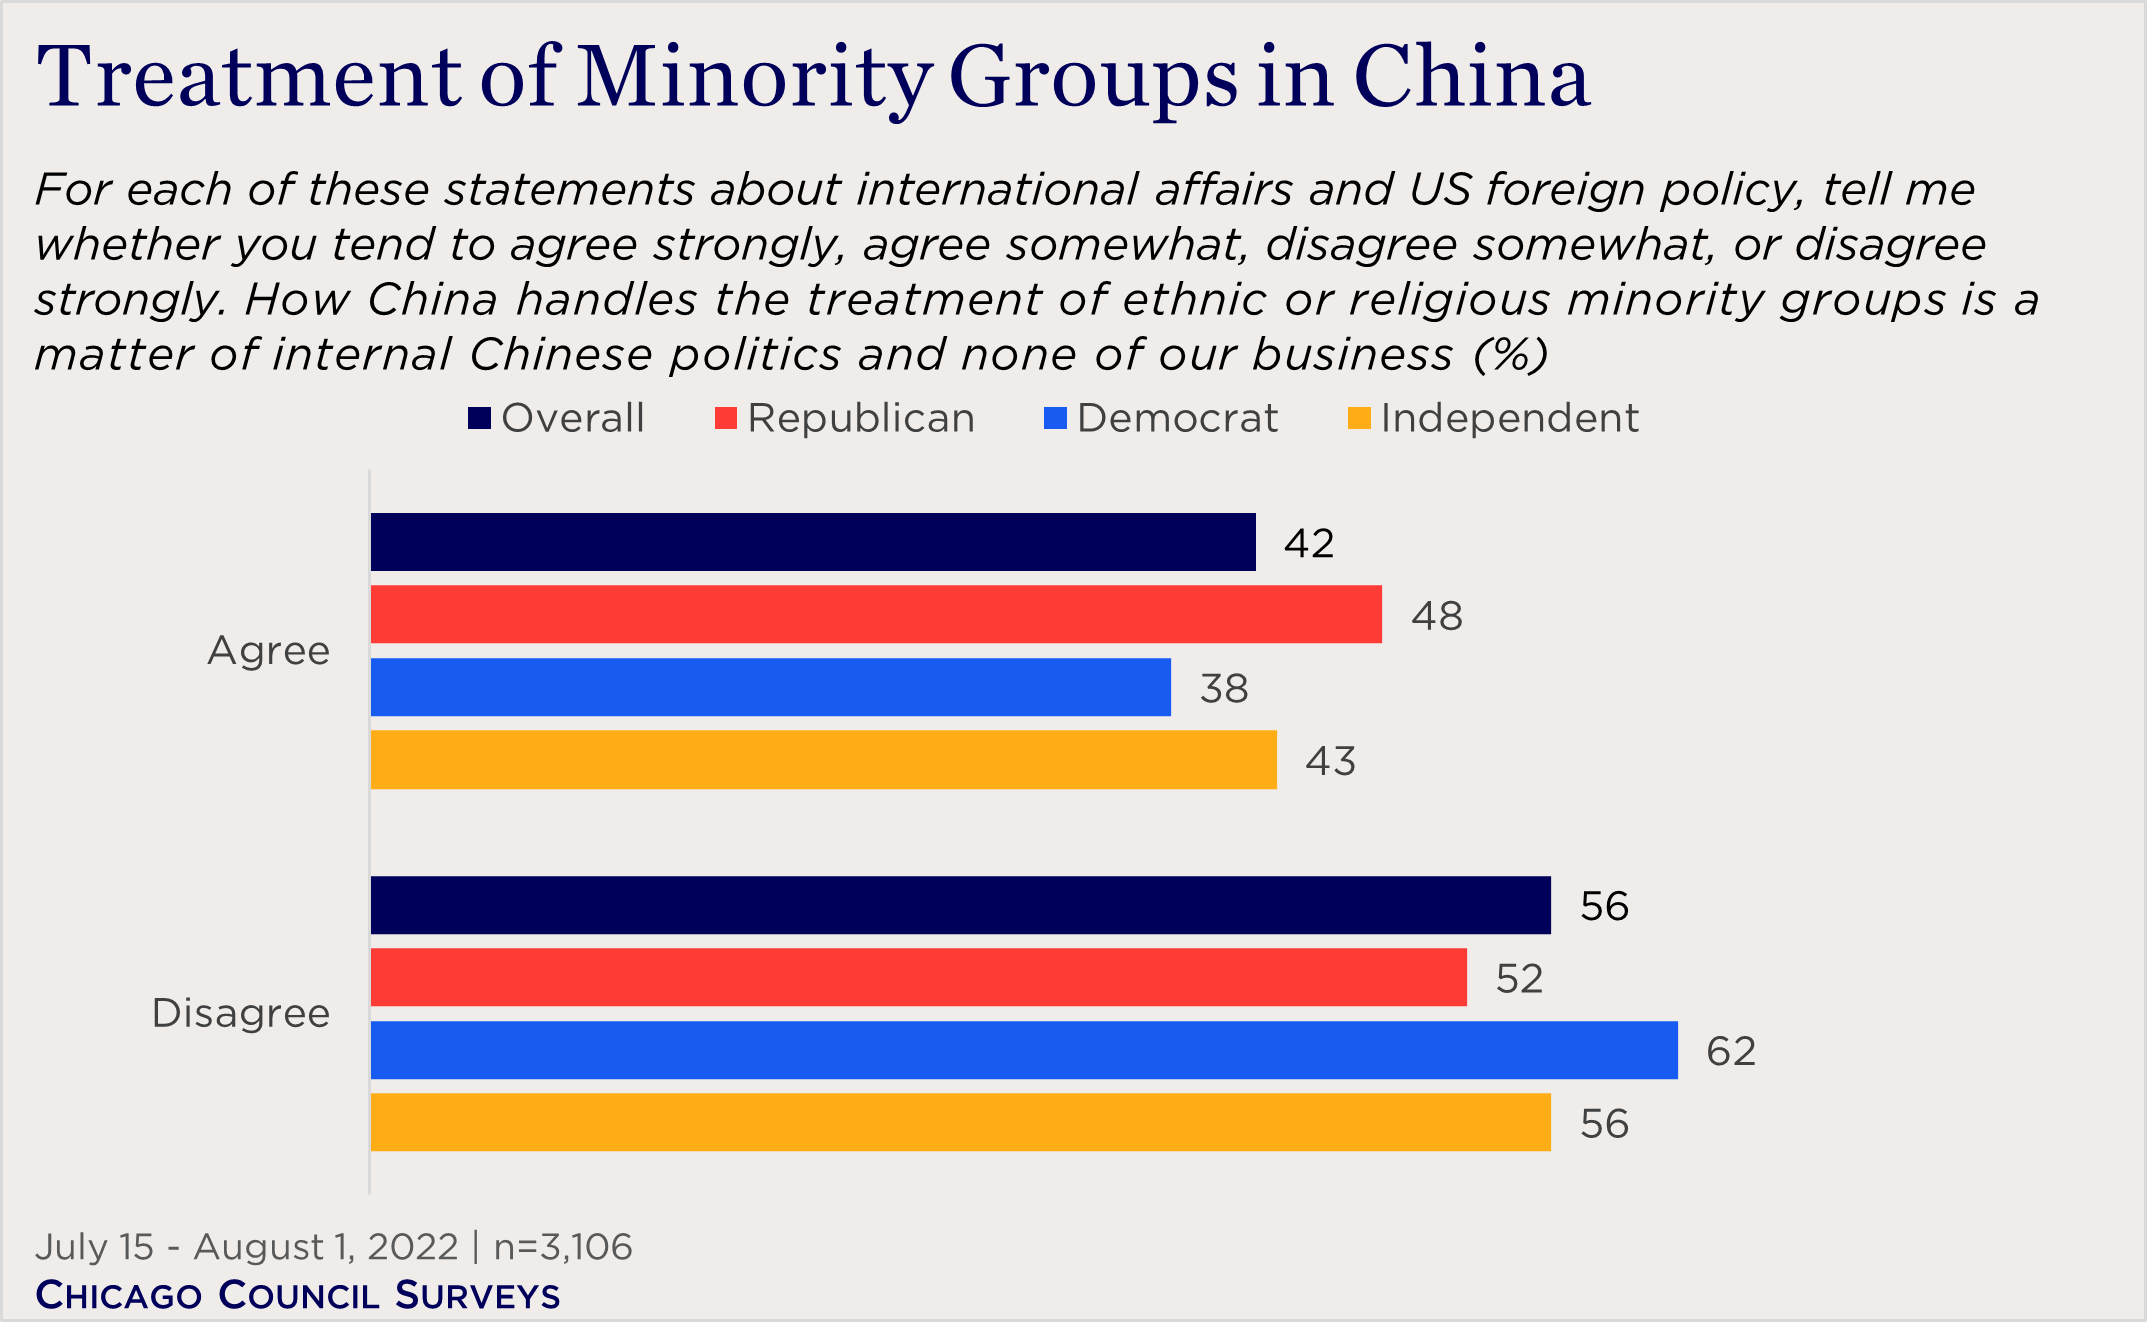 "bar chart showing partisan views on China's treatment of ethnic or minority groups"